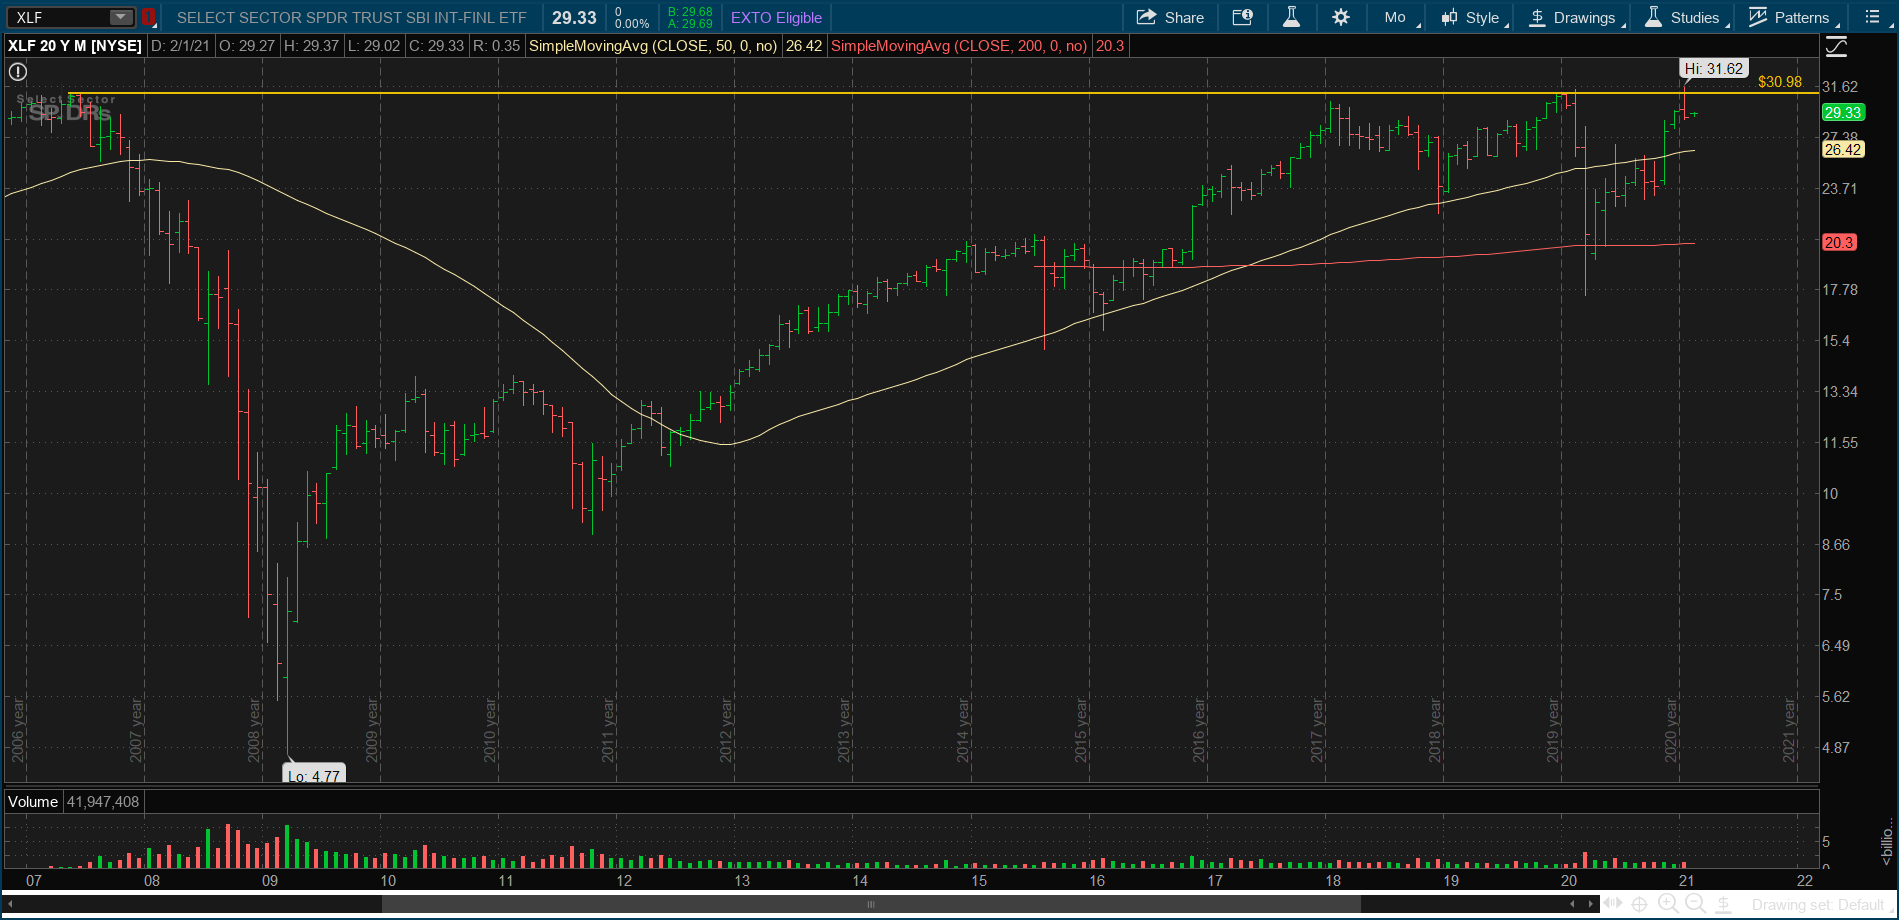 XLF Monthly Chart